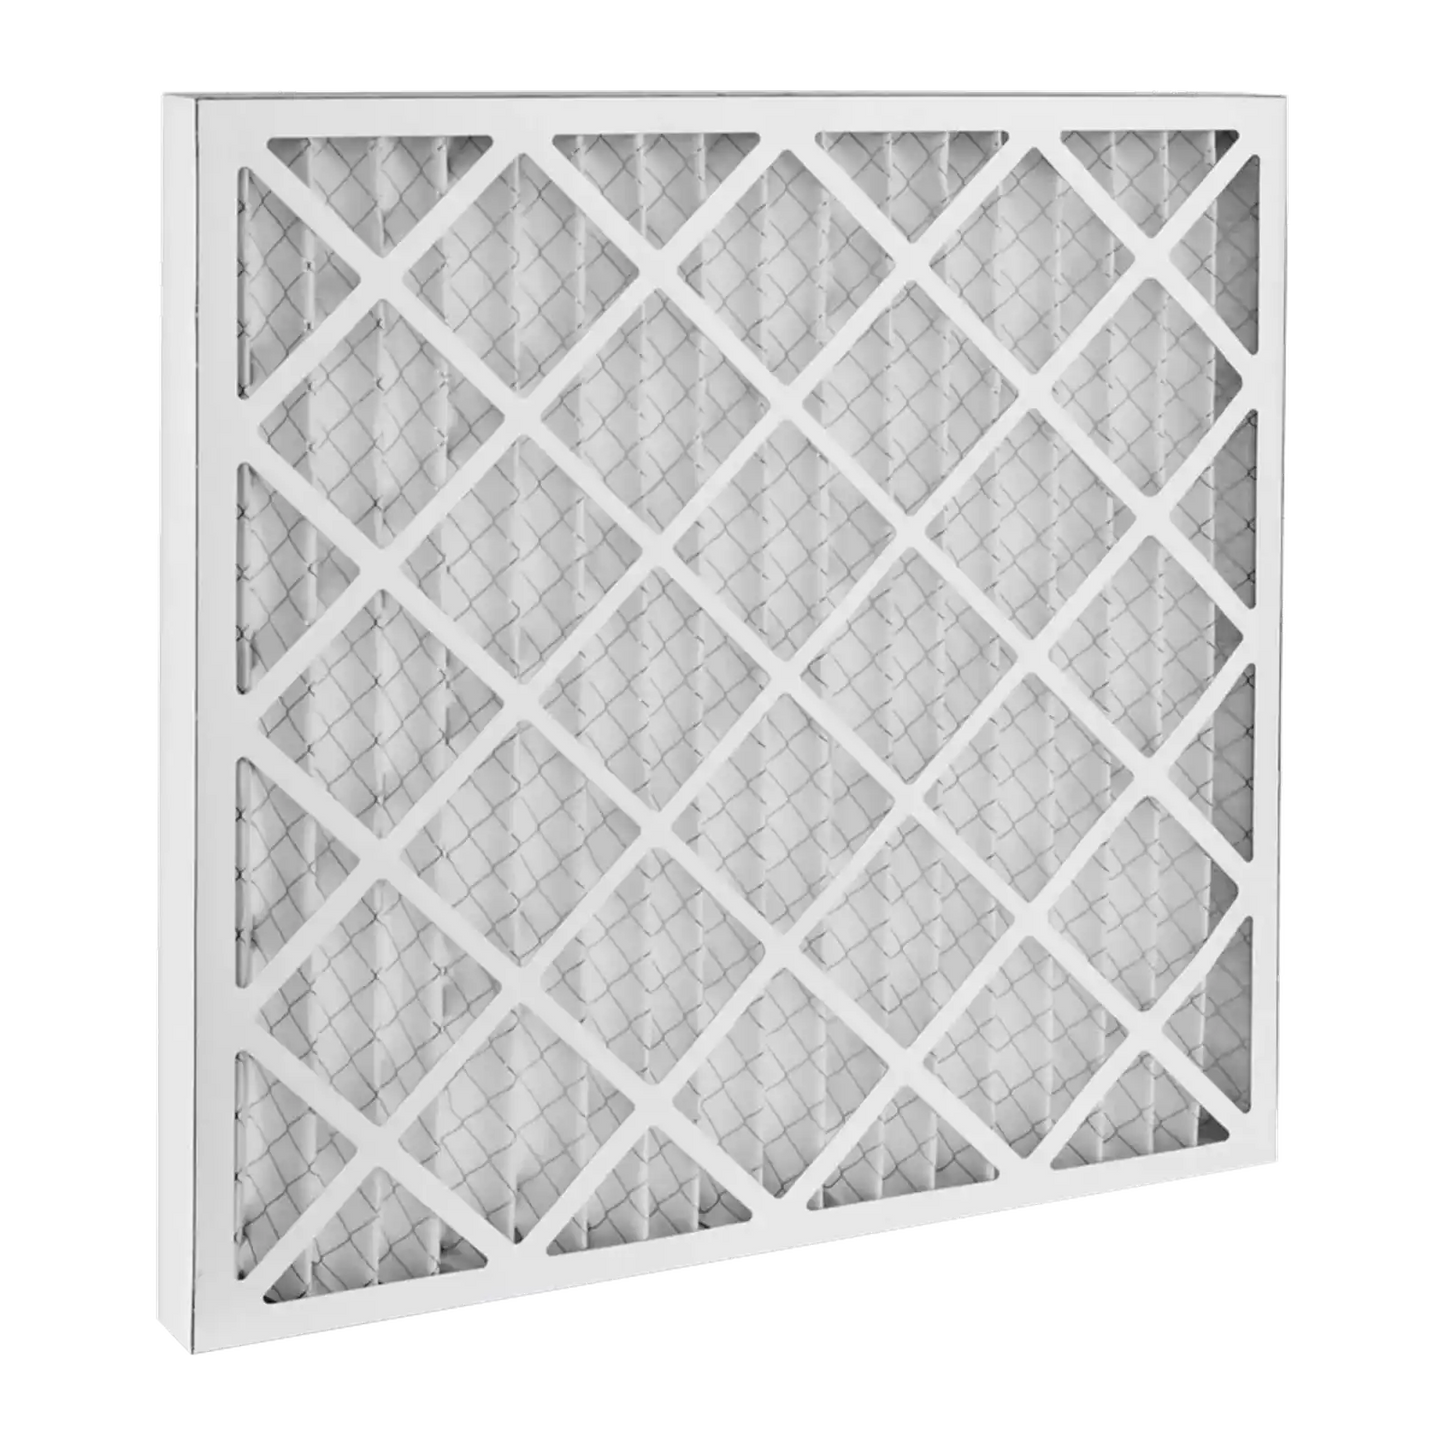 Dafco 11x20x1 Furnace AC Filter - Case of 12